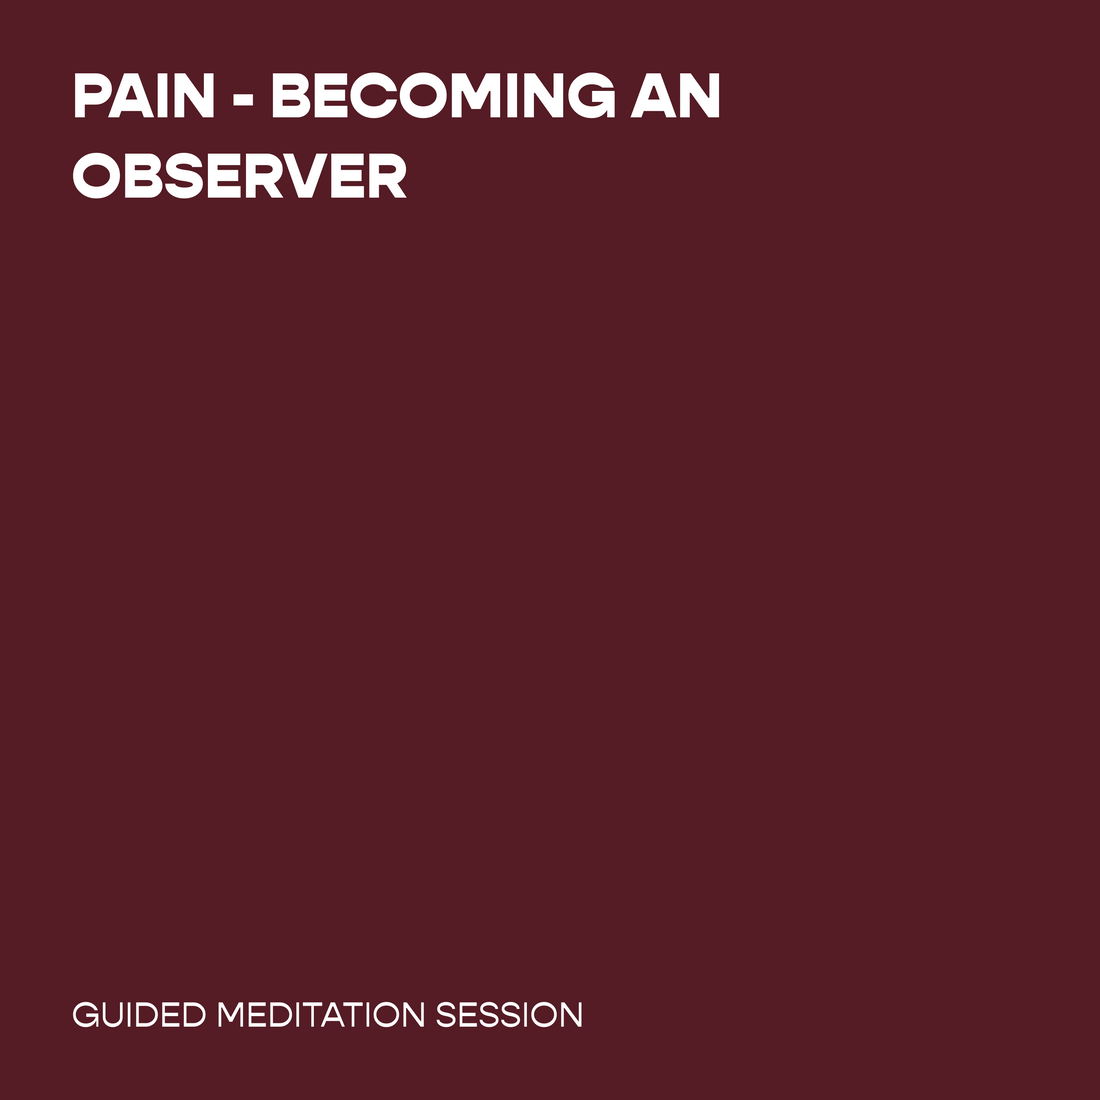 Pain - Becoming an Observer